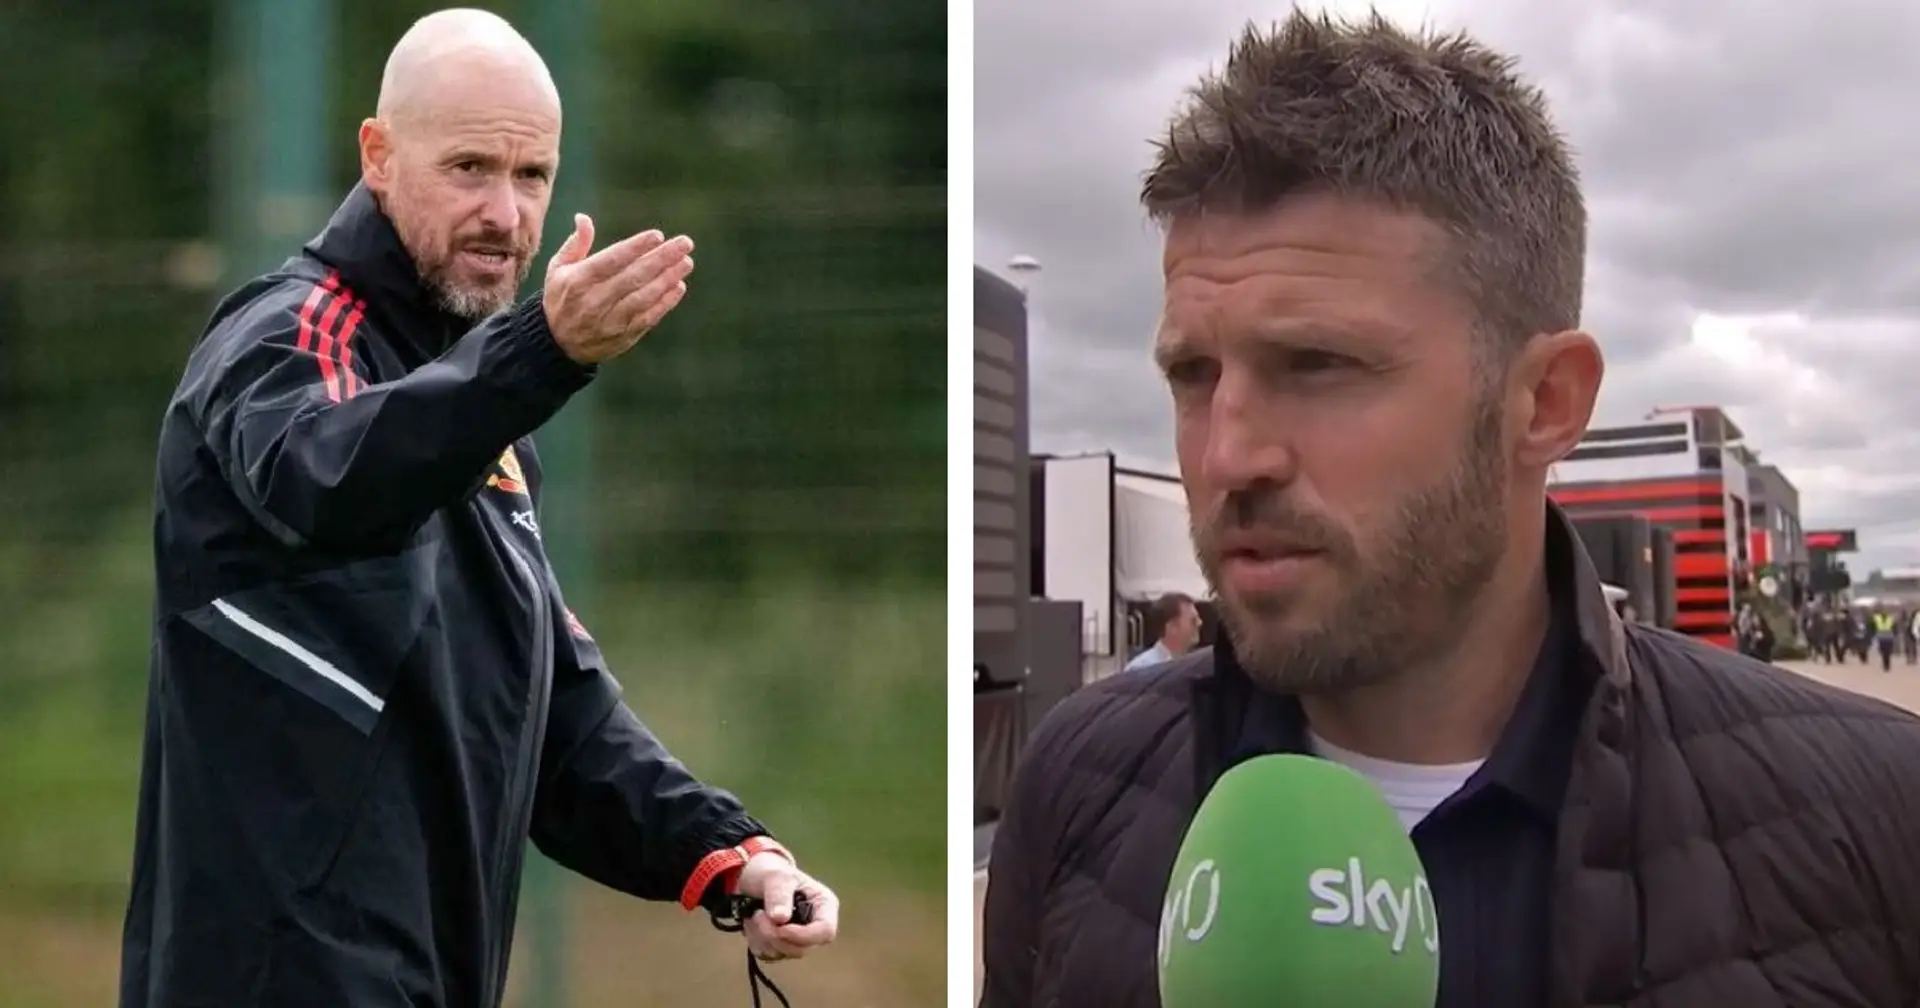 'It'll be interesting to see how it goes': Carrick looks forward to seeing Ten Hag's style of play